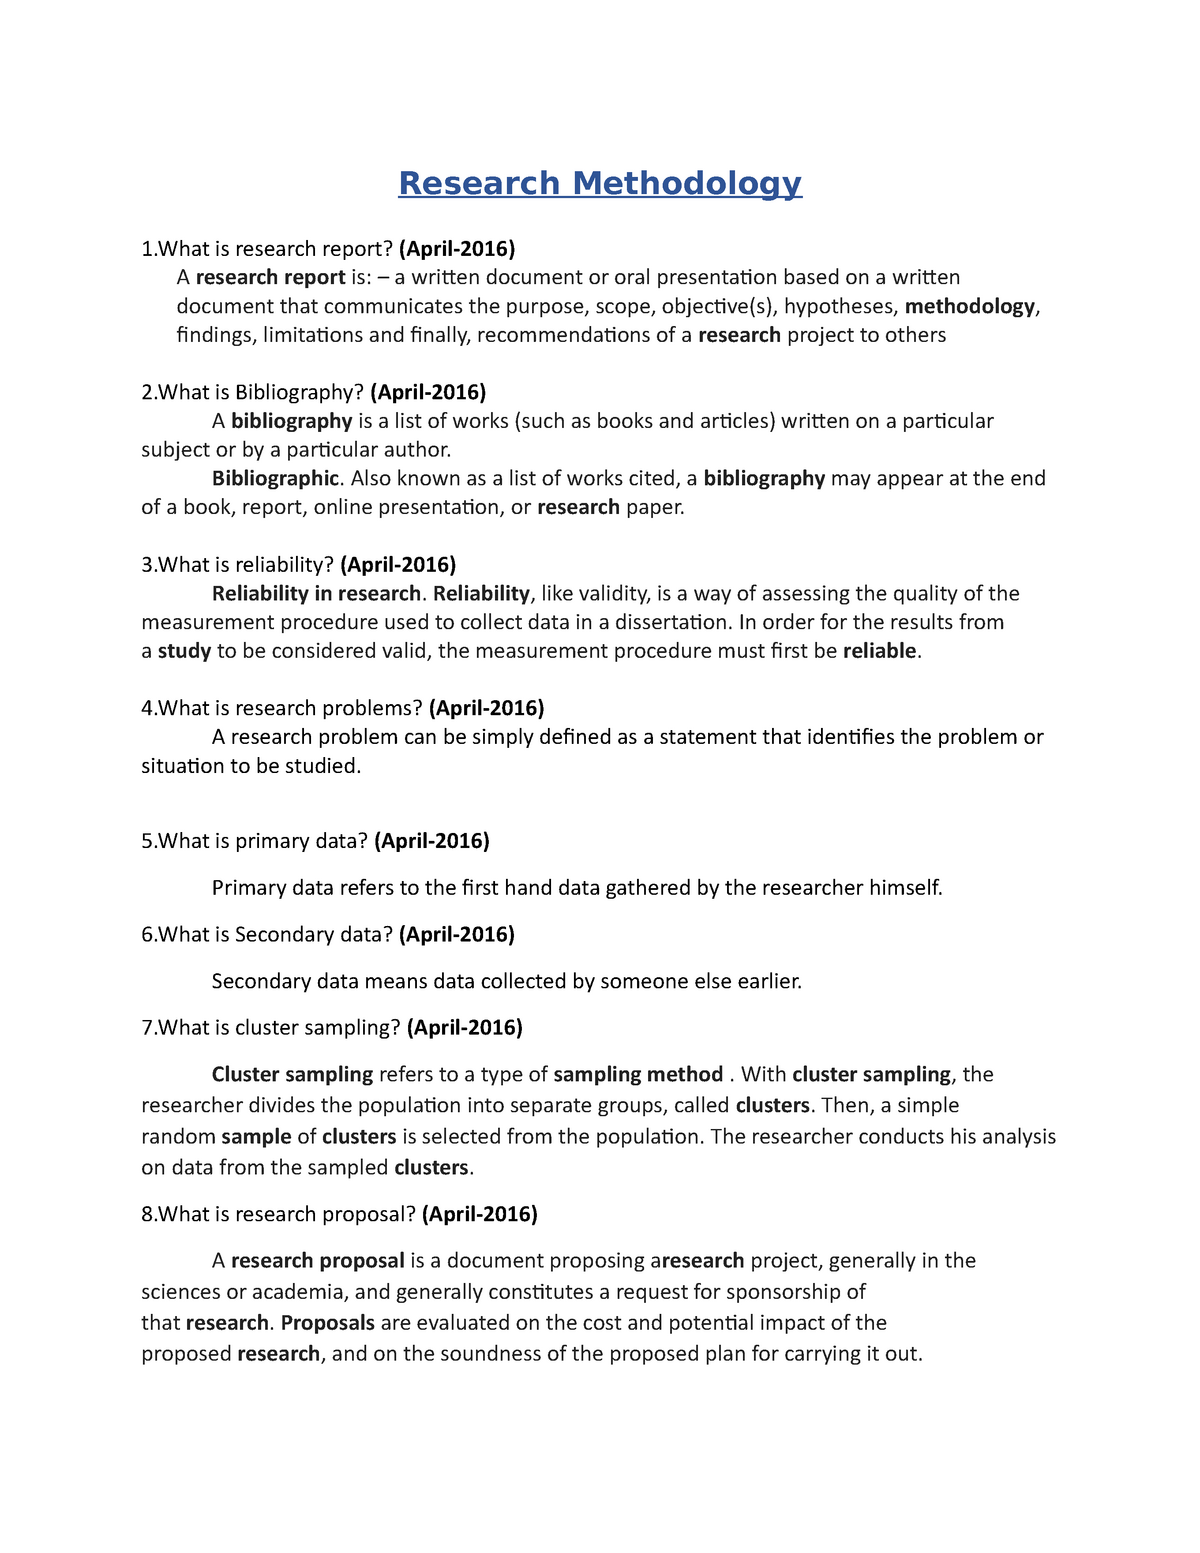 methodology in a research report